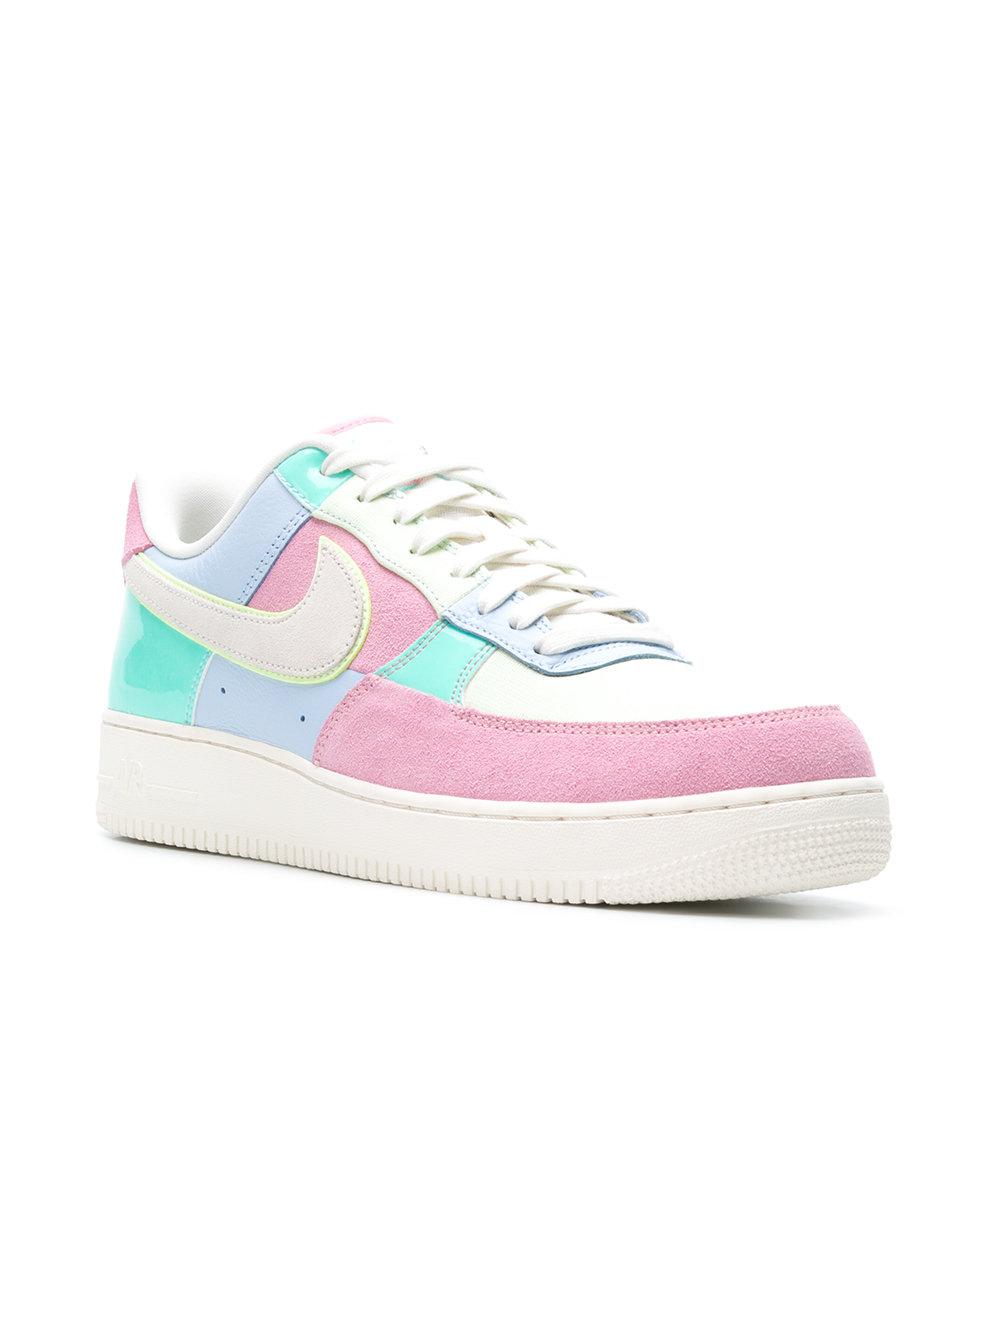 Nike Cotton Air Force 1 Easter Egg Sneakers - Lyst